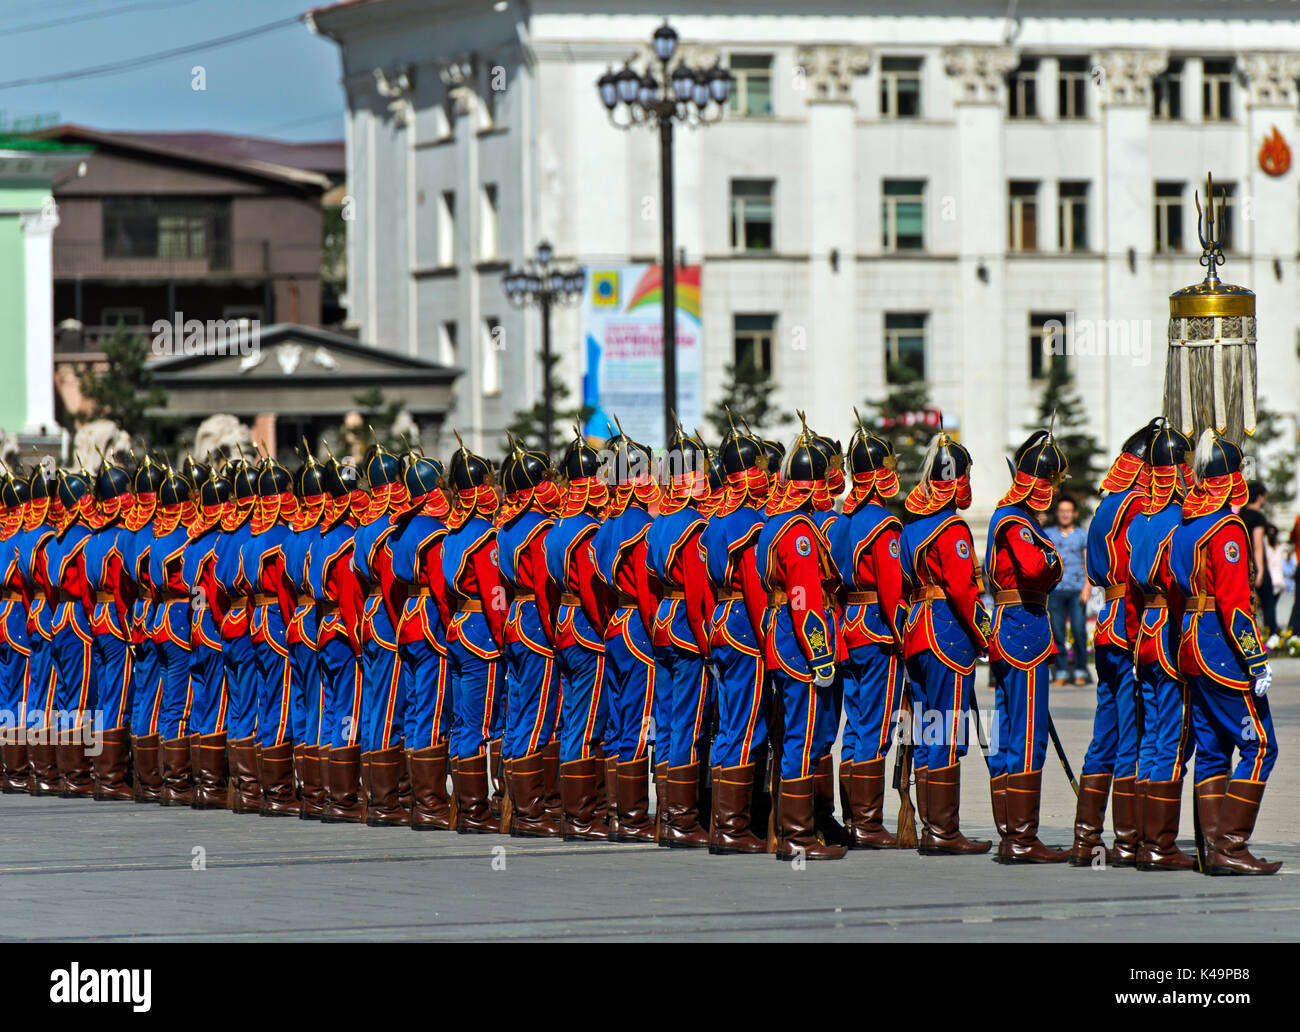 Mongolian Armed Forces Honorary Guard In Traditional Uniform On The Sukhbaatar Square, Ulaanbaatar, Mongolia Stock Photo